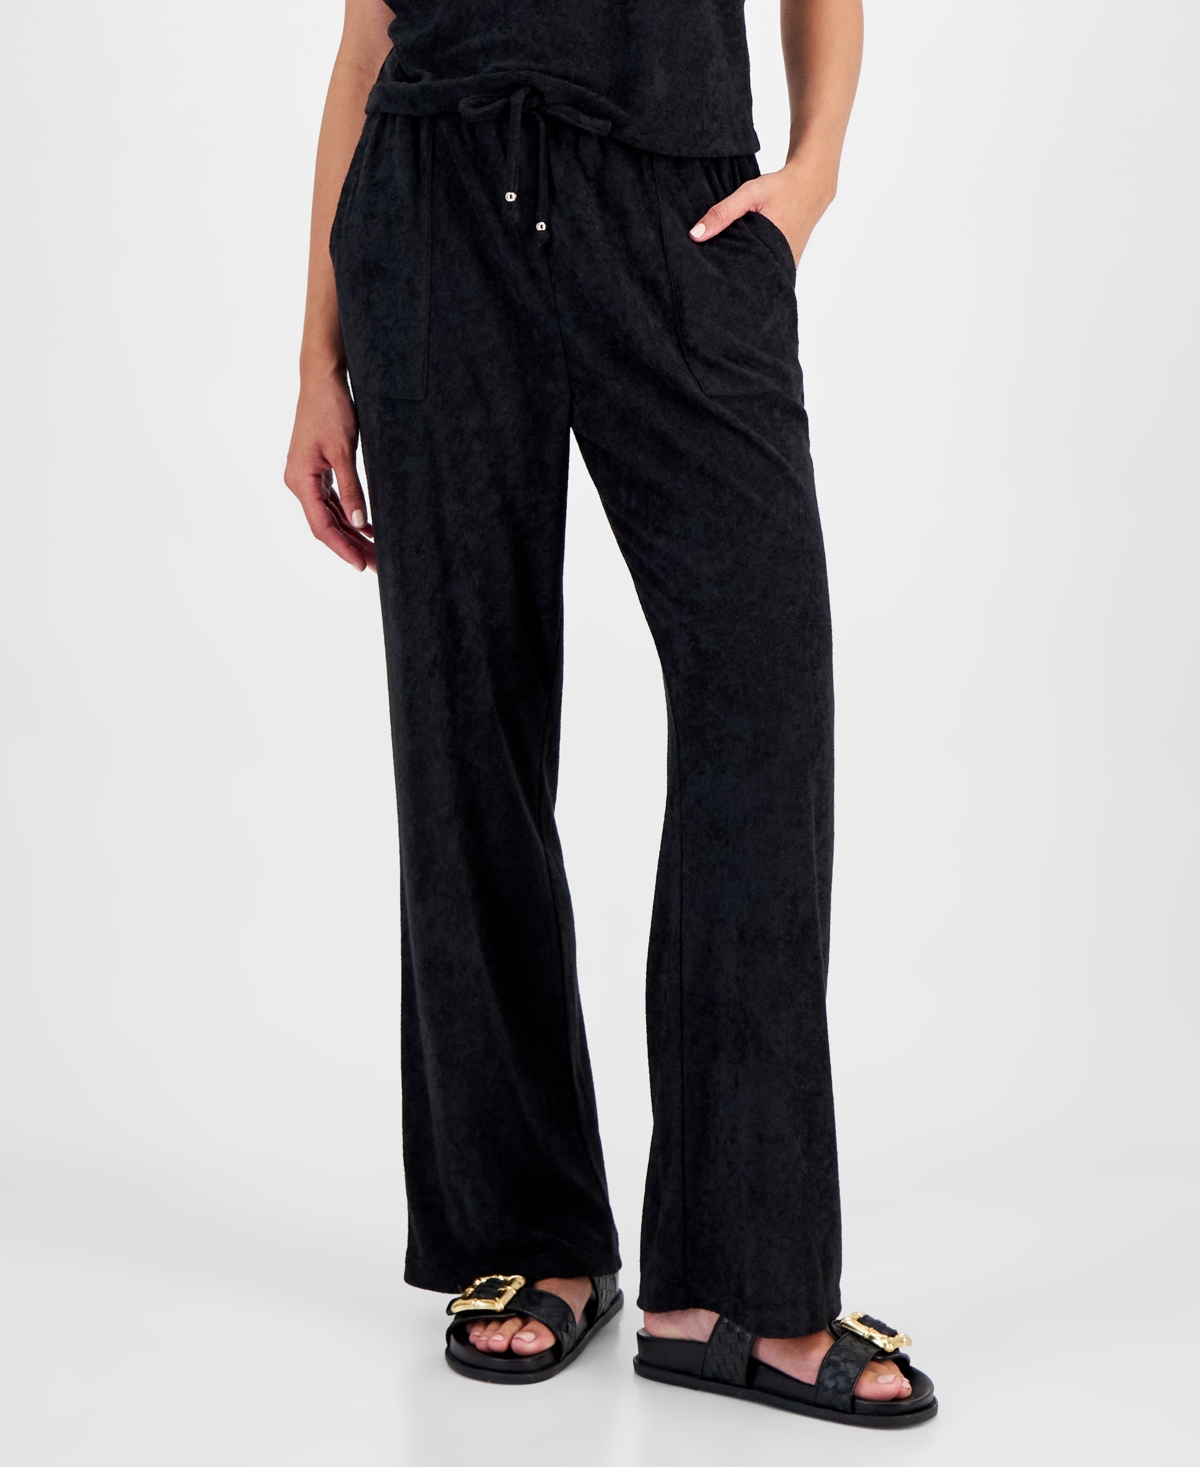 Juniors' Velour Drawstring Cover-Up Pants, Created for Macy's - Violet Sun